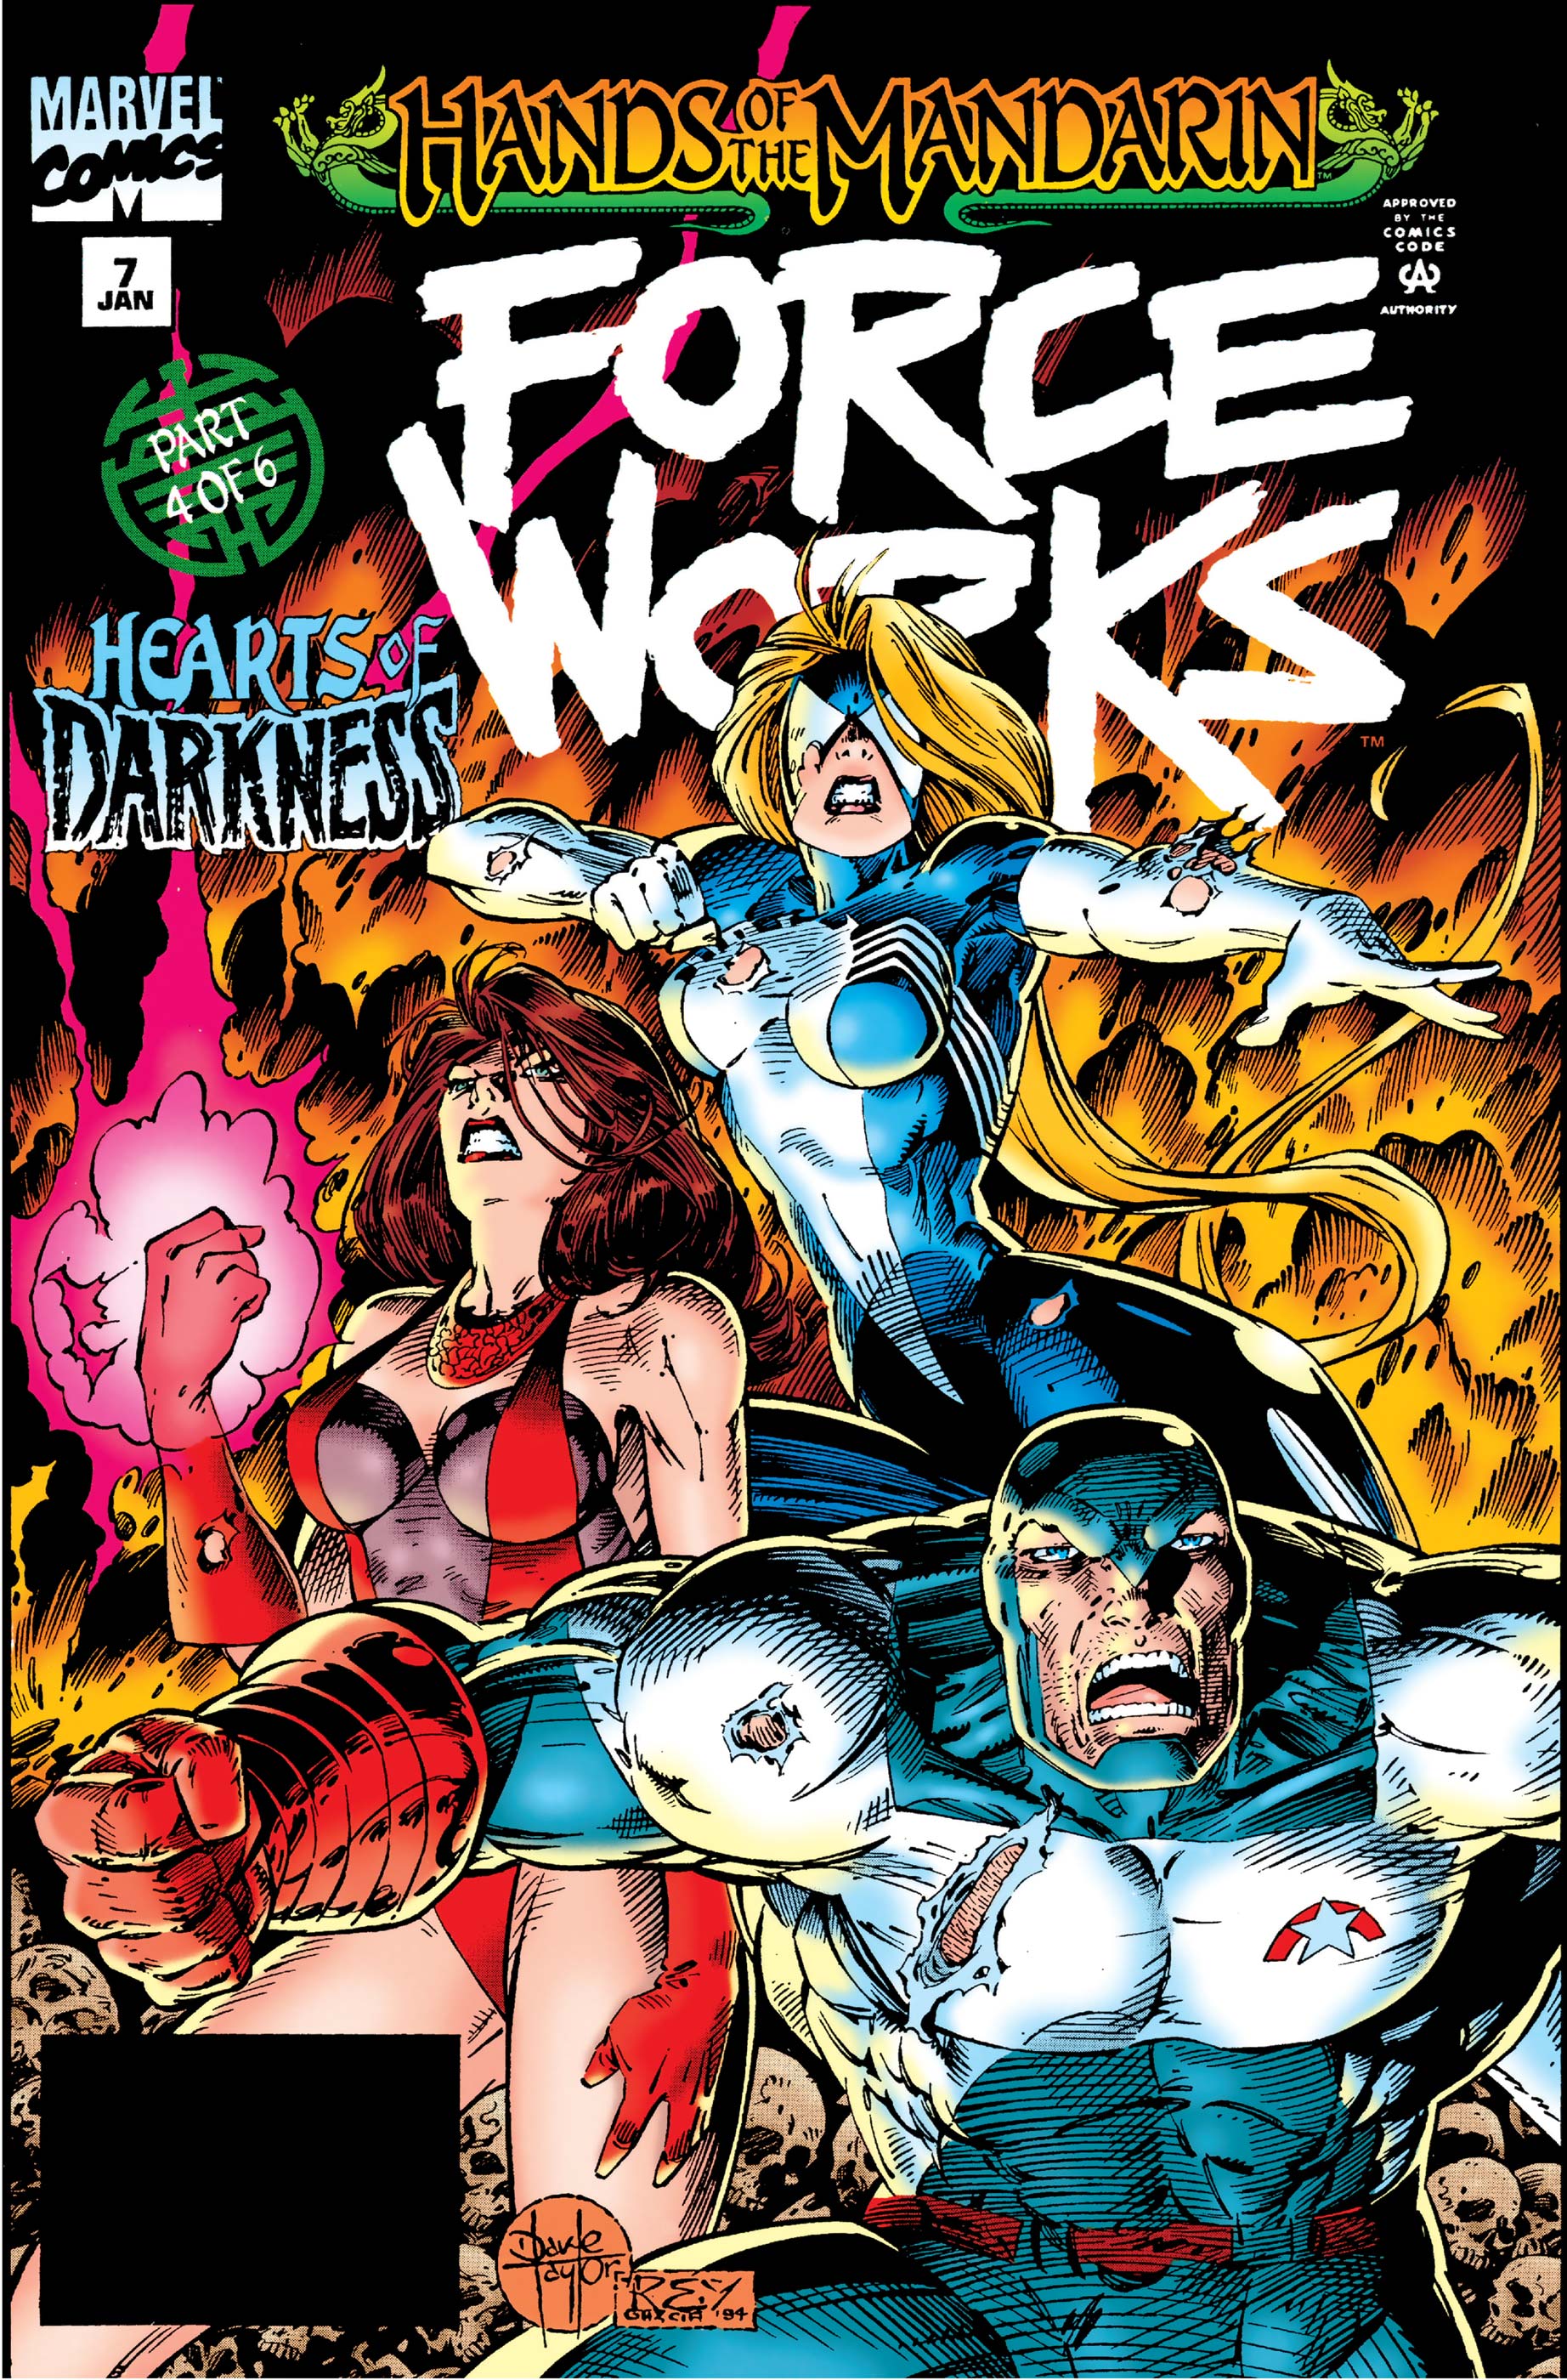 Force Works (1994) #7